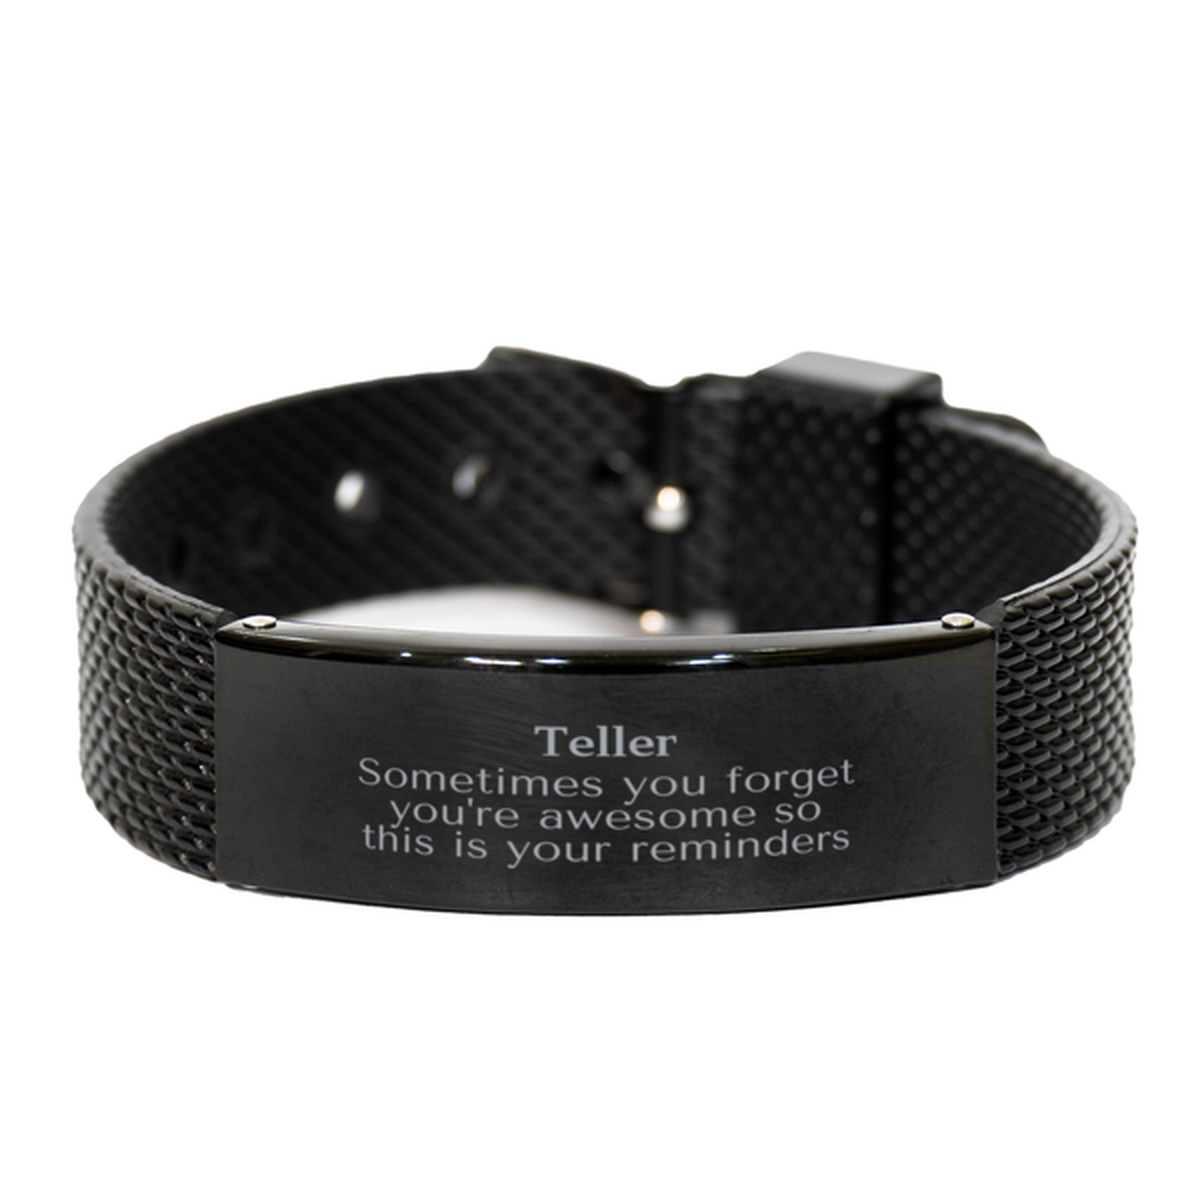 Sentimental Teller Black Shark Mesh Bracelet, Teller Sometimes you forget you're awesome so this is your reminders, Graduation Christmas Birthday Gifts for Teller, Men, Women, Coworkers